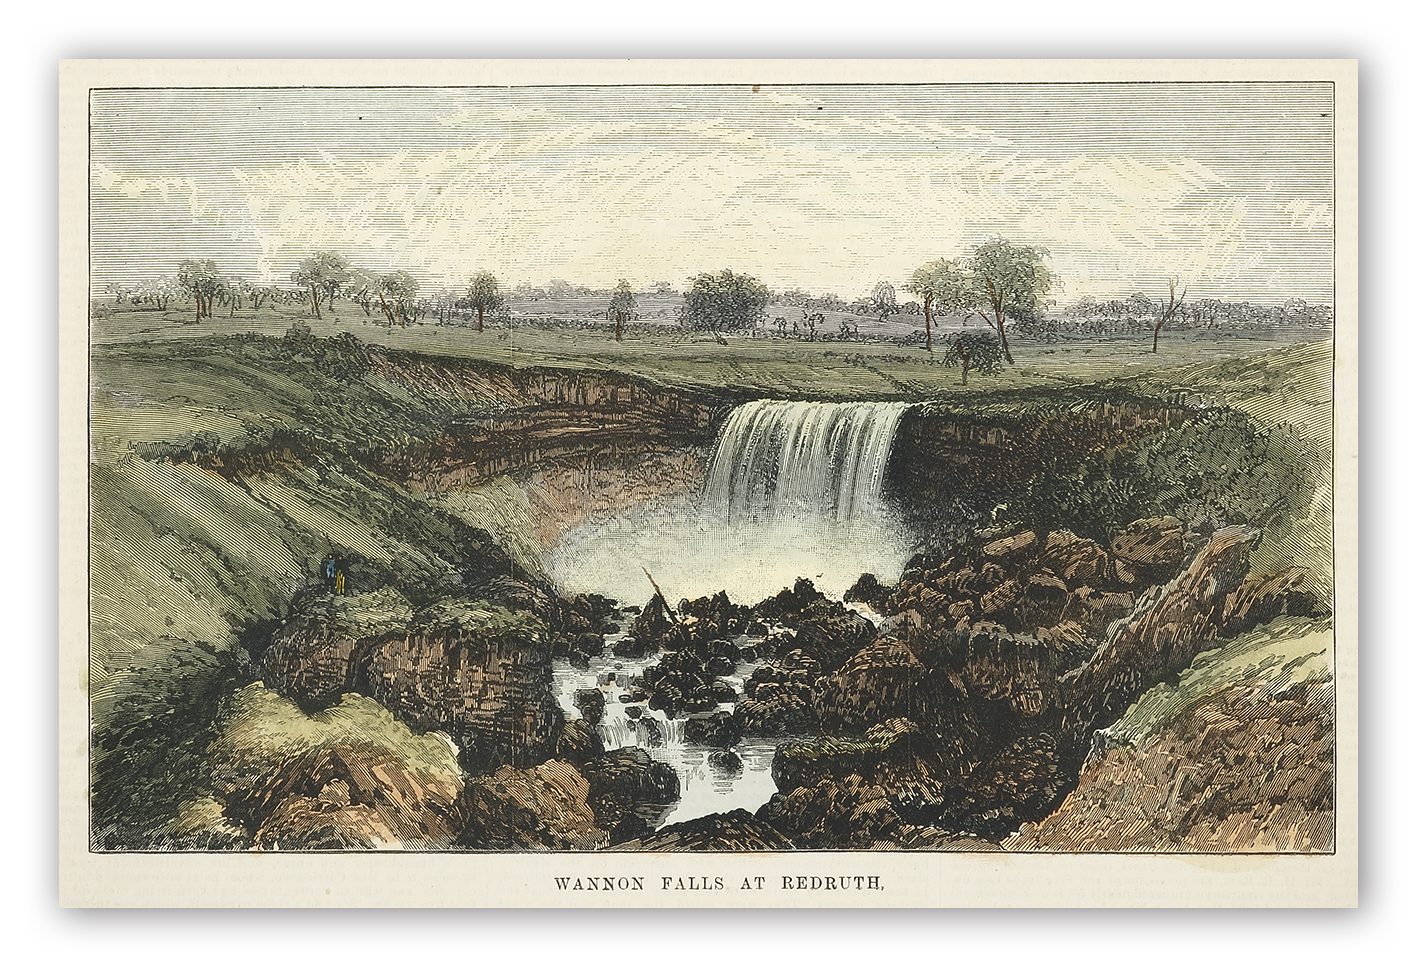 Wannon Falls at Redruth. - Antique View from 1876